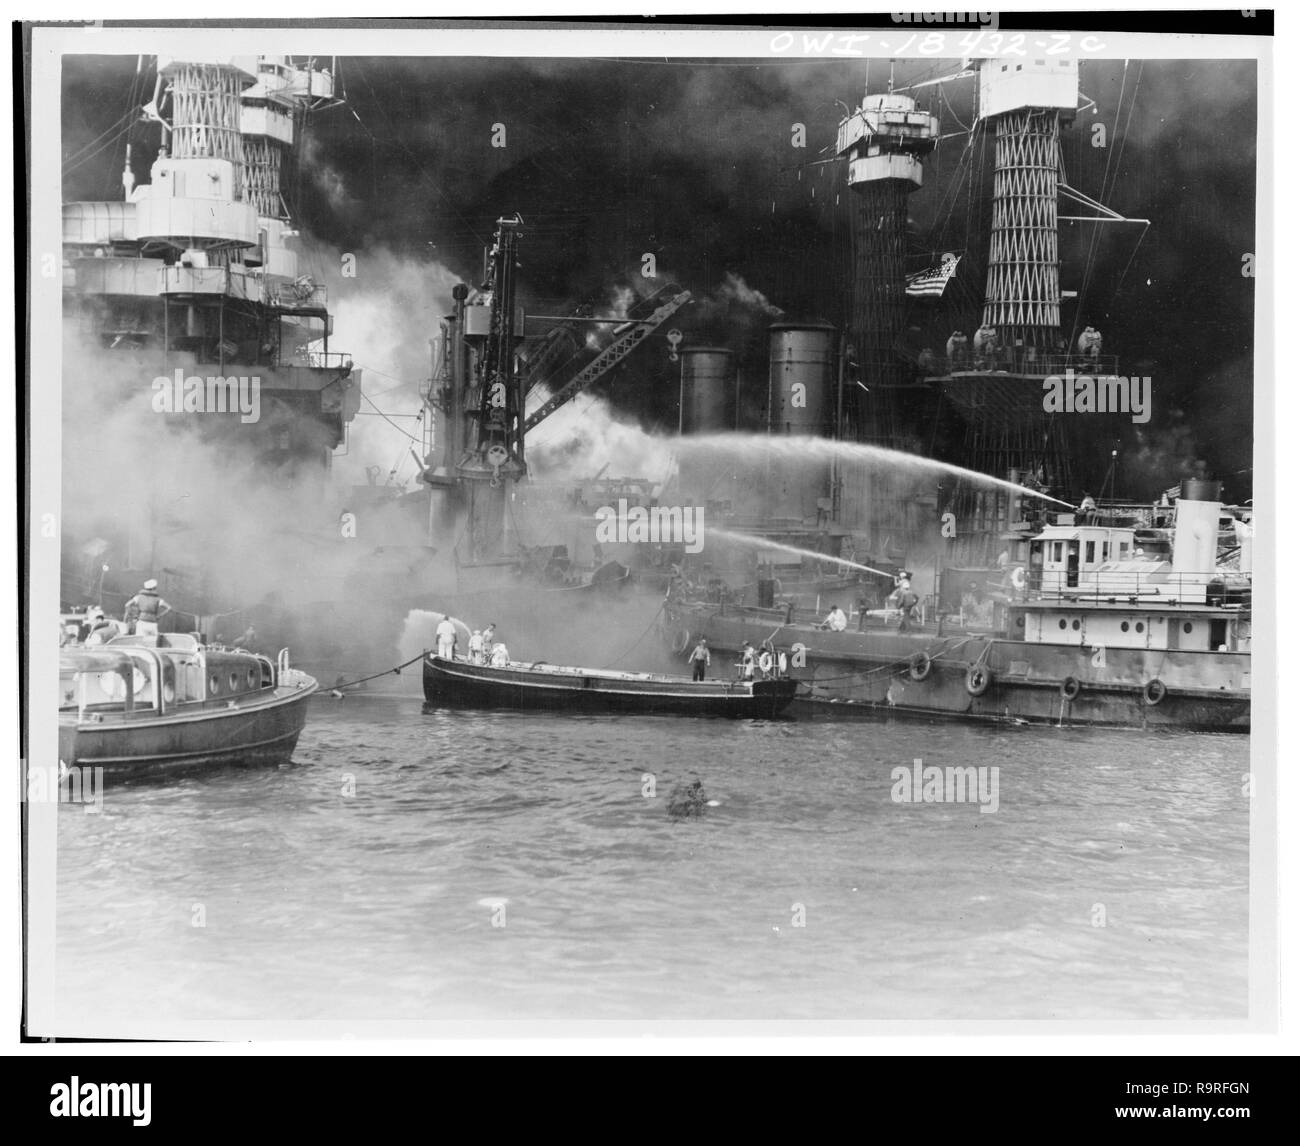 USS West Virginia aflame. Disregarding the dangerous possibilities of explosions, United States sailors man their boats at the side of the burning battleship, USS West Virginia, to better fight the flames started by Japanese torpedoes and bombs. Note the national colors flying against the smoke-blackened sky. Japanese aerial attack on Pearl Harbor, Hawaii, December 7, 1941. (Library of Congress-Farm Security Administration - Office of War Information) Stock Photo